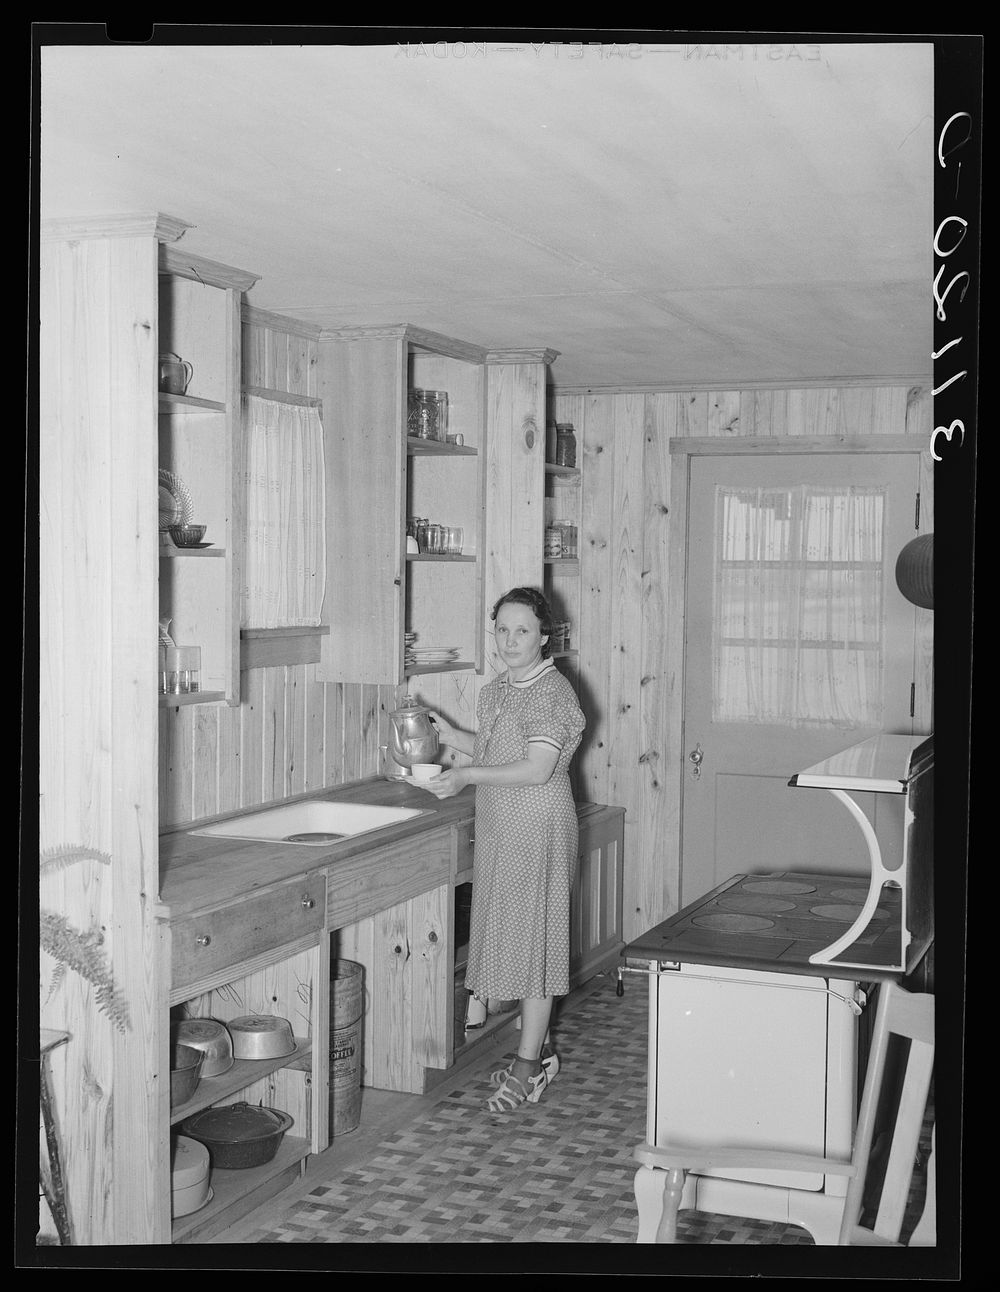 Southeast Missouri Farms. Kitchen of home of new farm unit. La Forge project, Missouri by Russell Lee